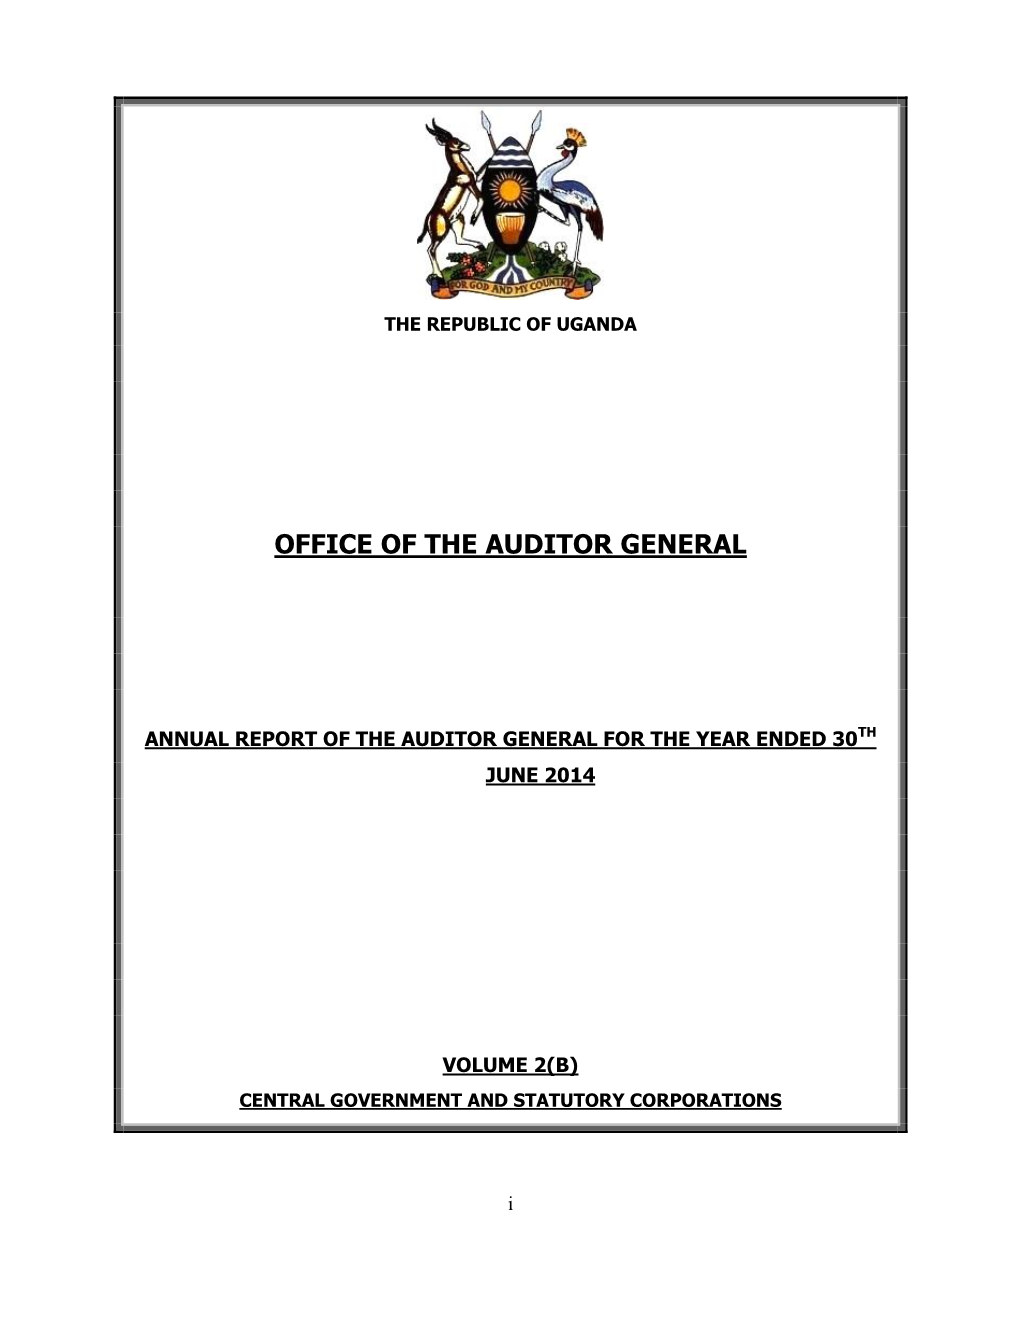 Office of the Auditor General